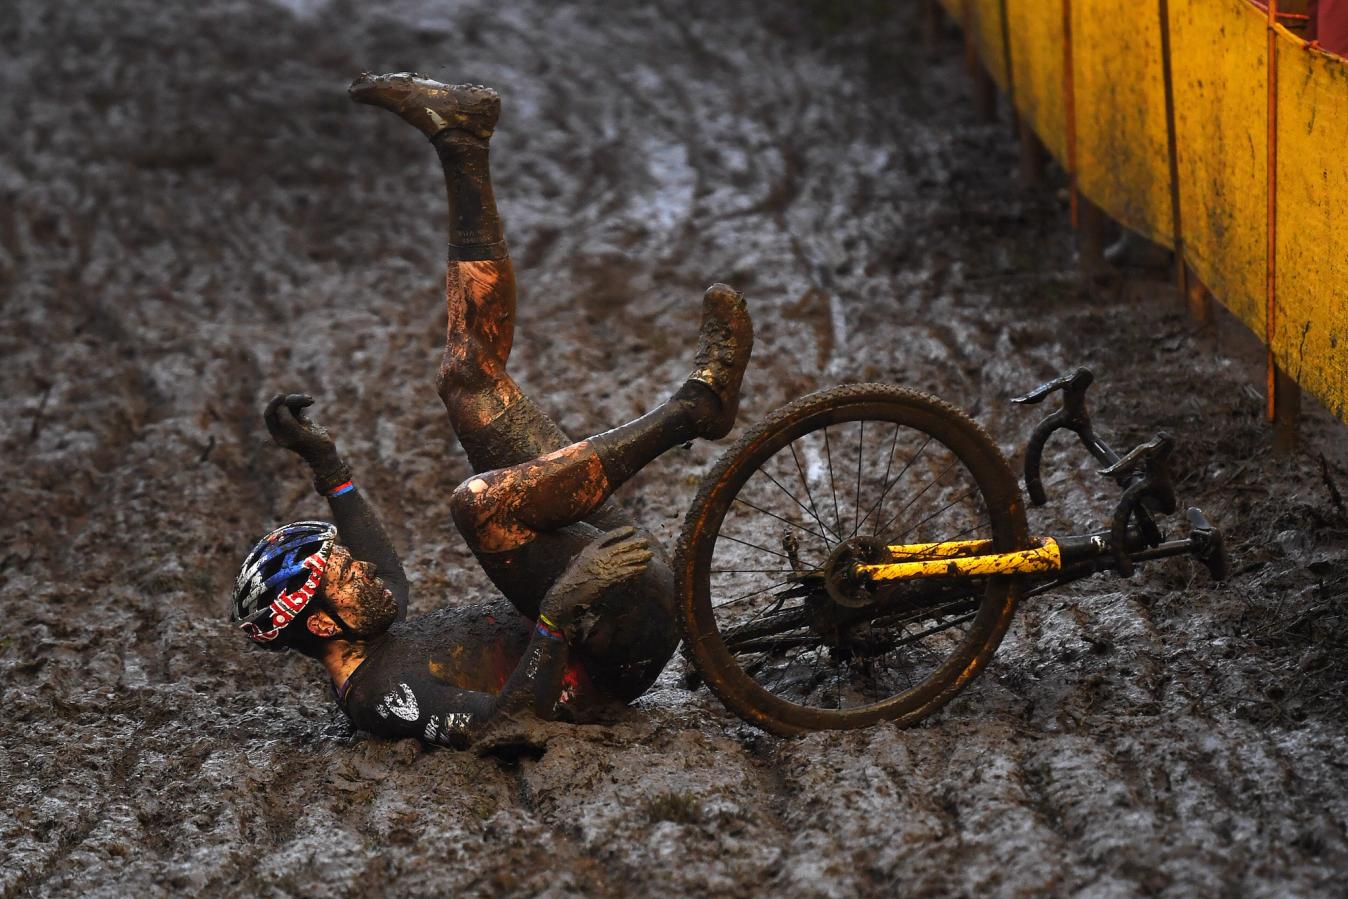 Even knobbly ‘cross tyres can lose their grip on the muddy chutes that riders are often faced with